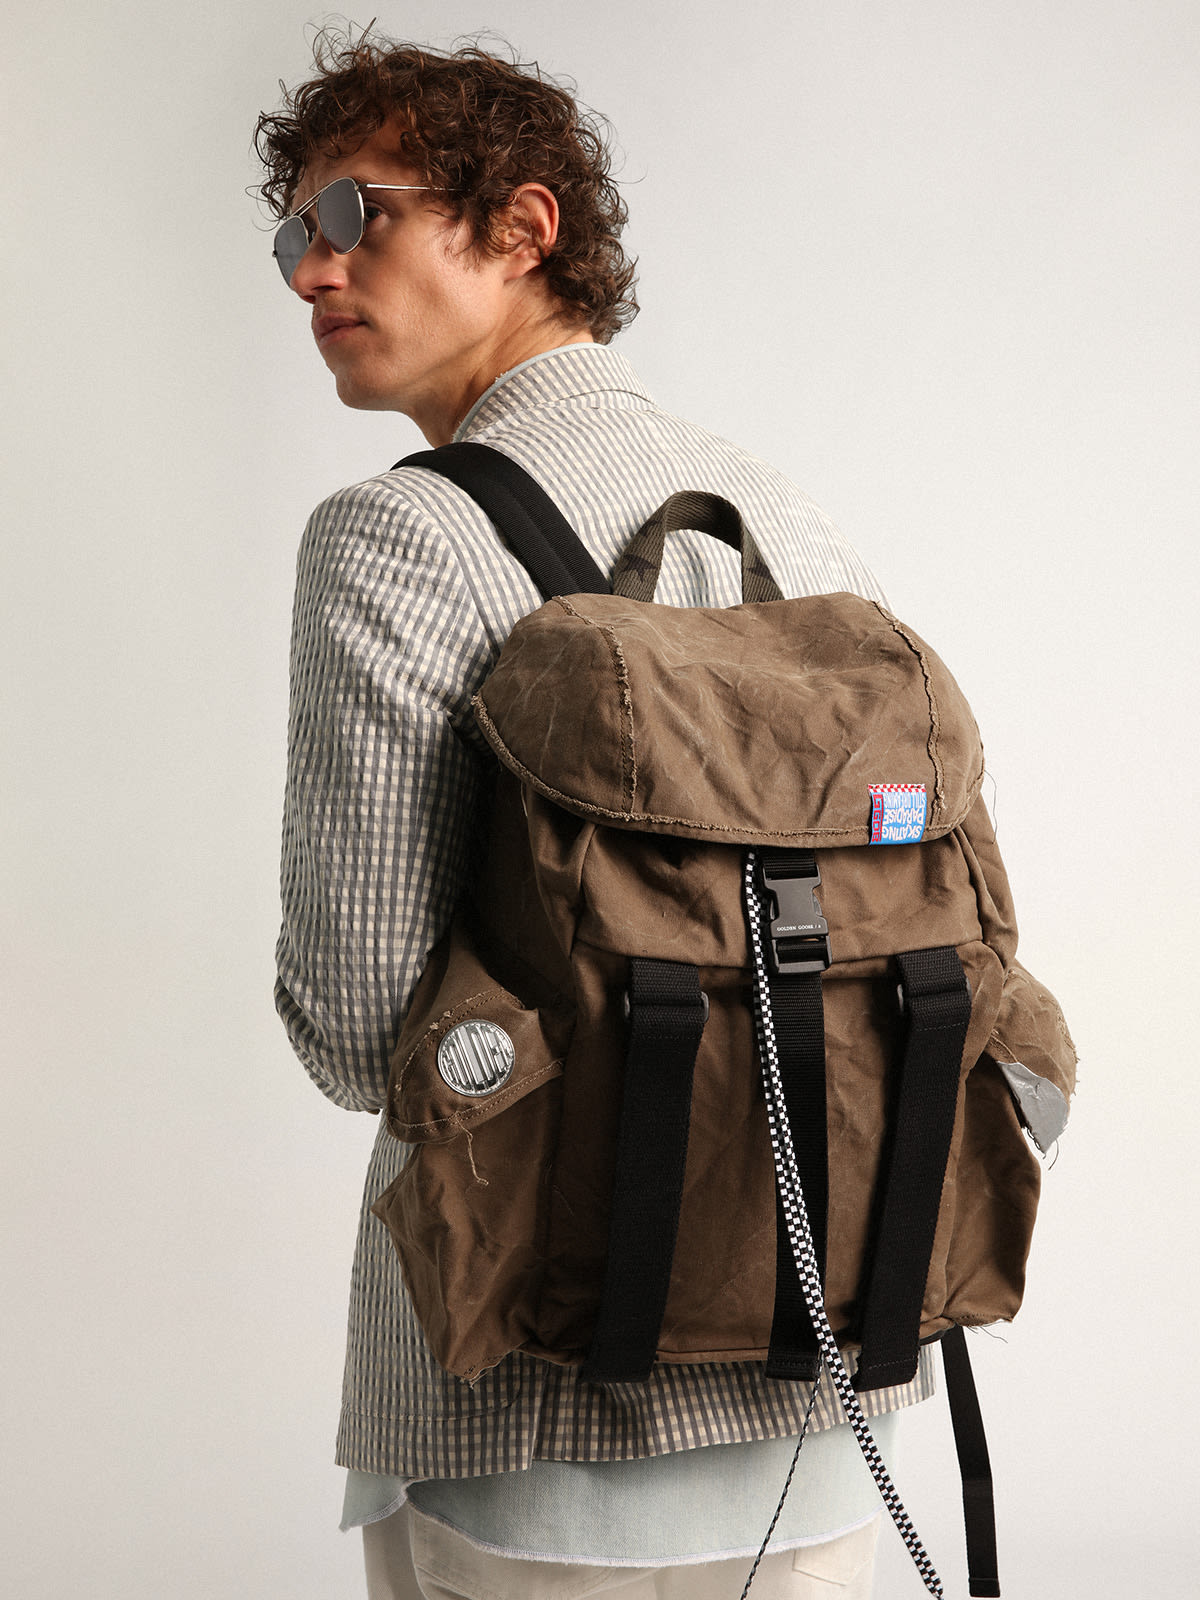 Golden Goose - Dreamer backpack in military green fabric with side pockets in 